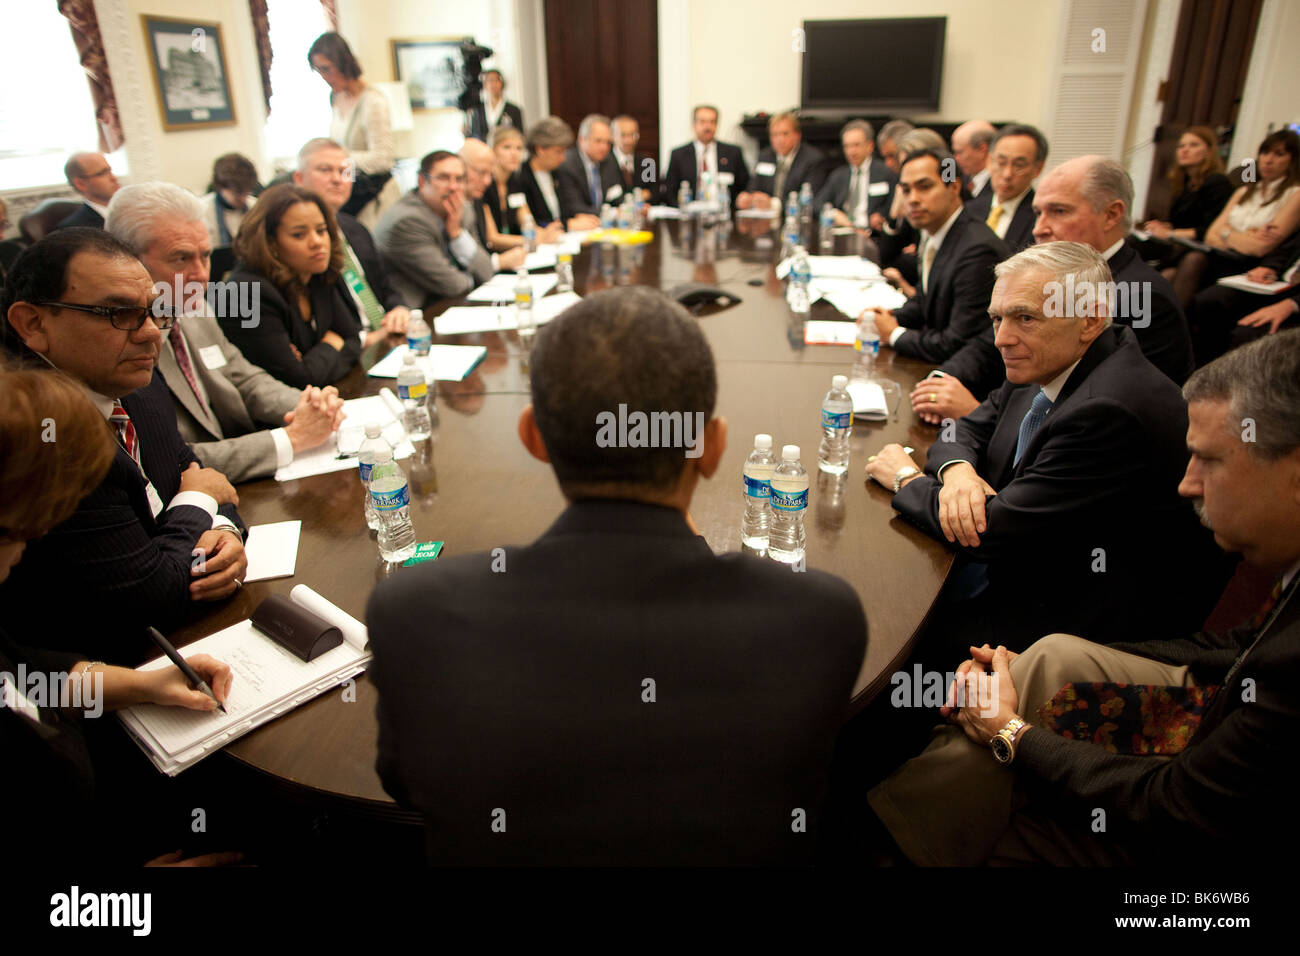 President Barack Obama during the White House Forum on Jobs and Economic Growth Stock Photo